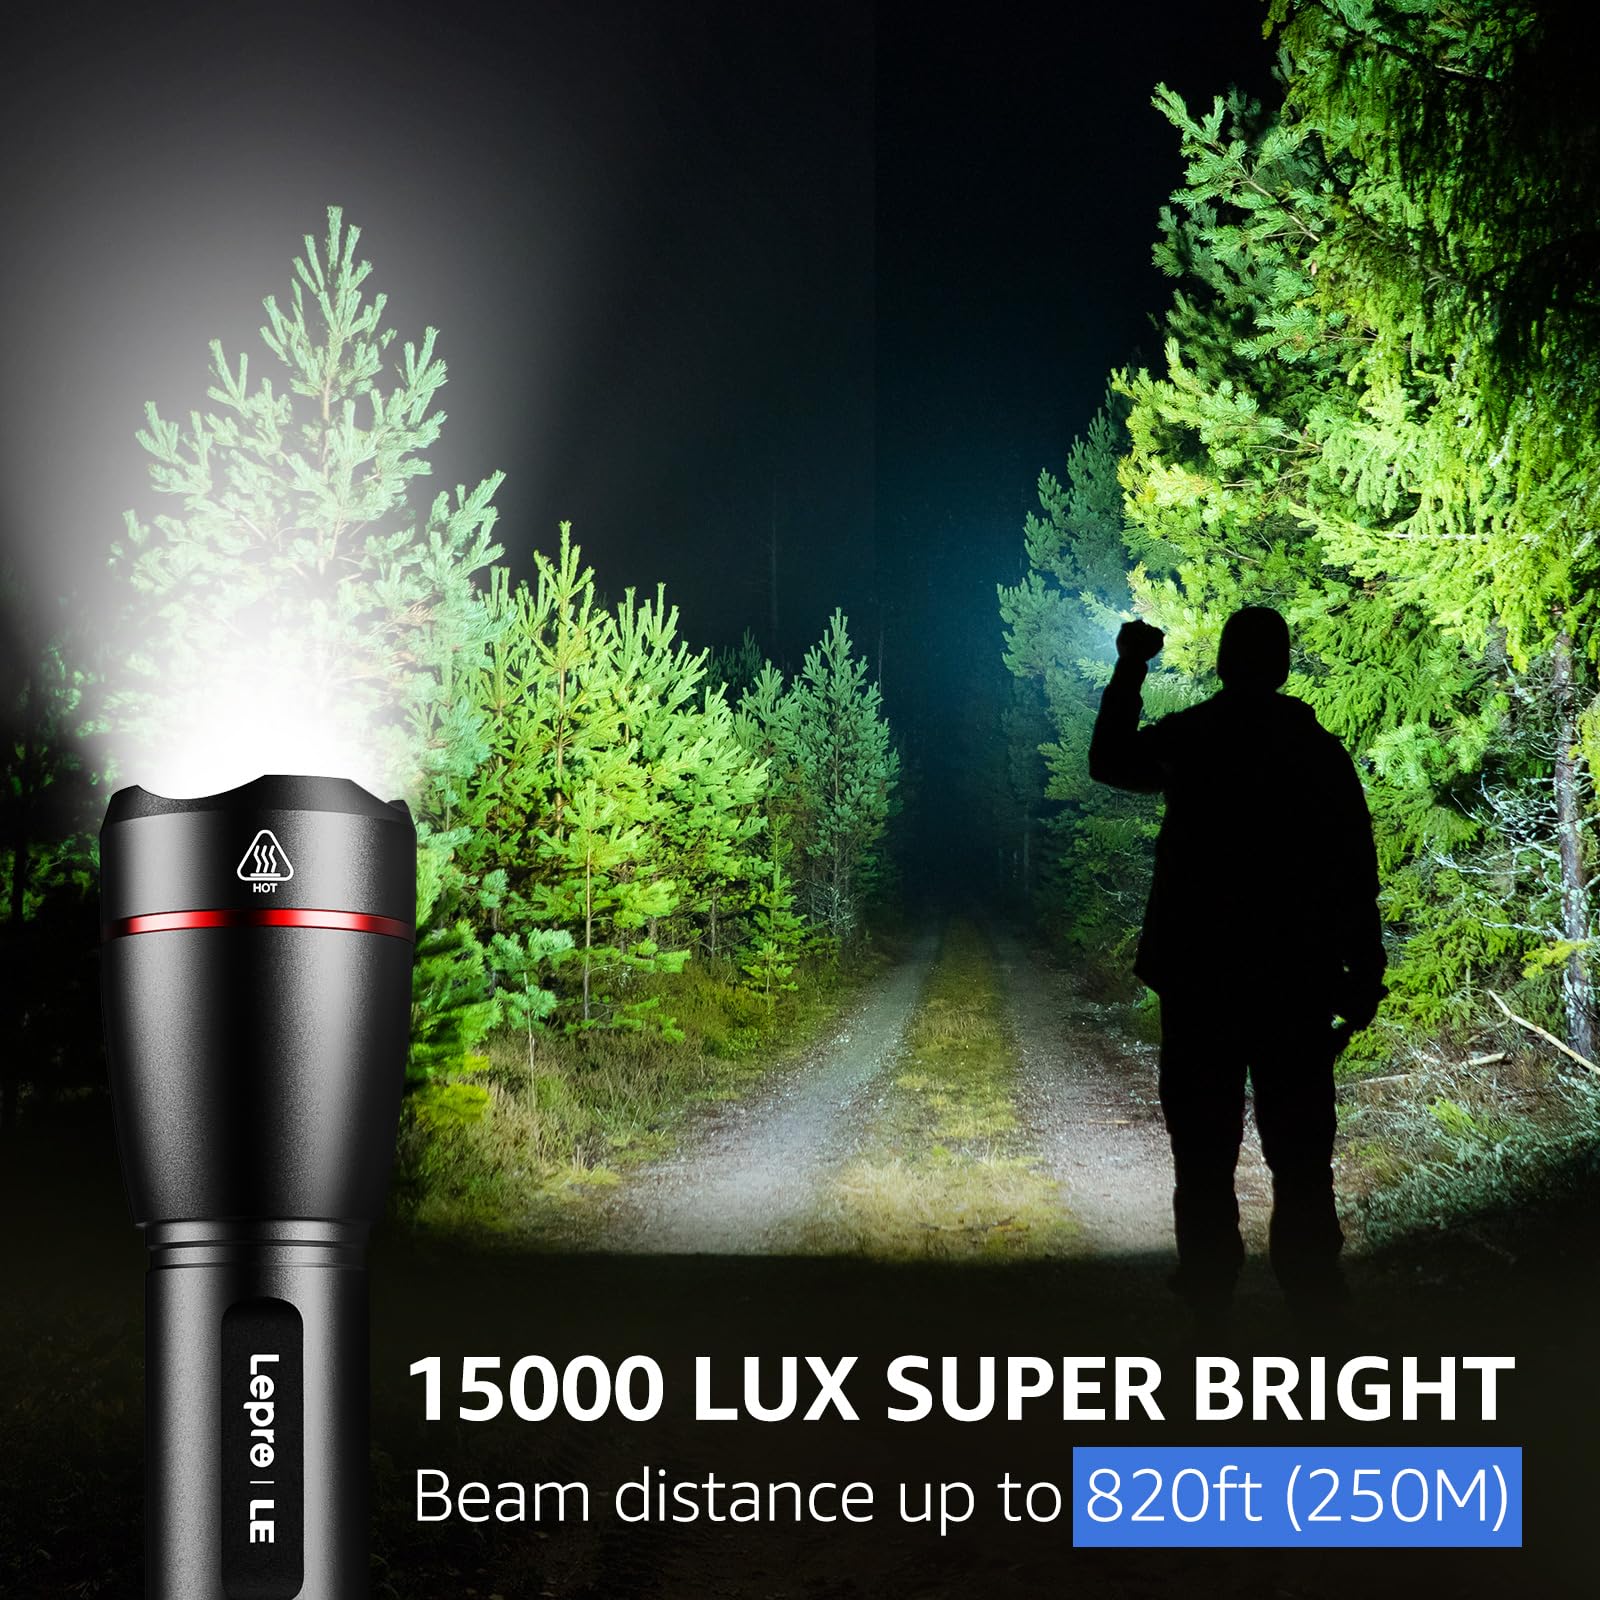 Lepro LED Rechargeable Flashlight, LP3000 High Lumens, Zoomable, Bright Flashlight, Waterproof, 5 Lighting Modes,Small Handheld Flashlight for Camping, Emergencies, USB Cable Included